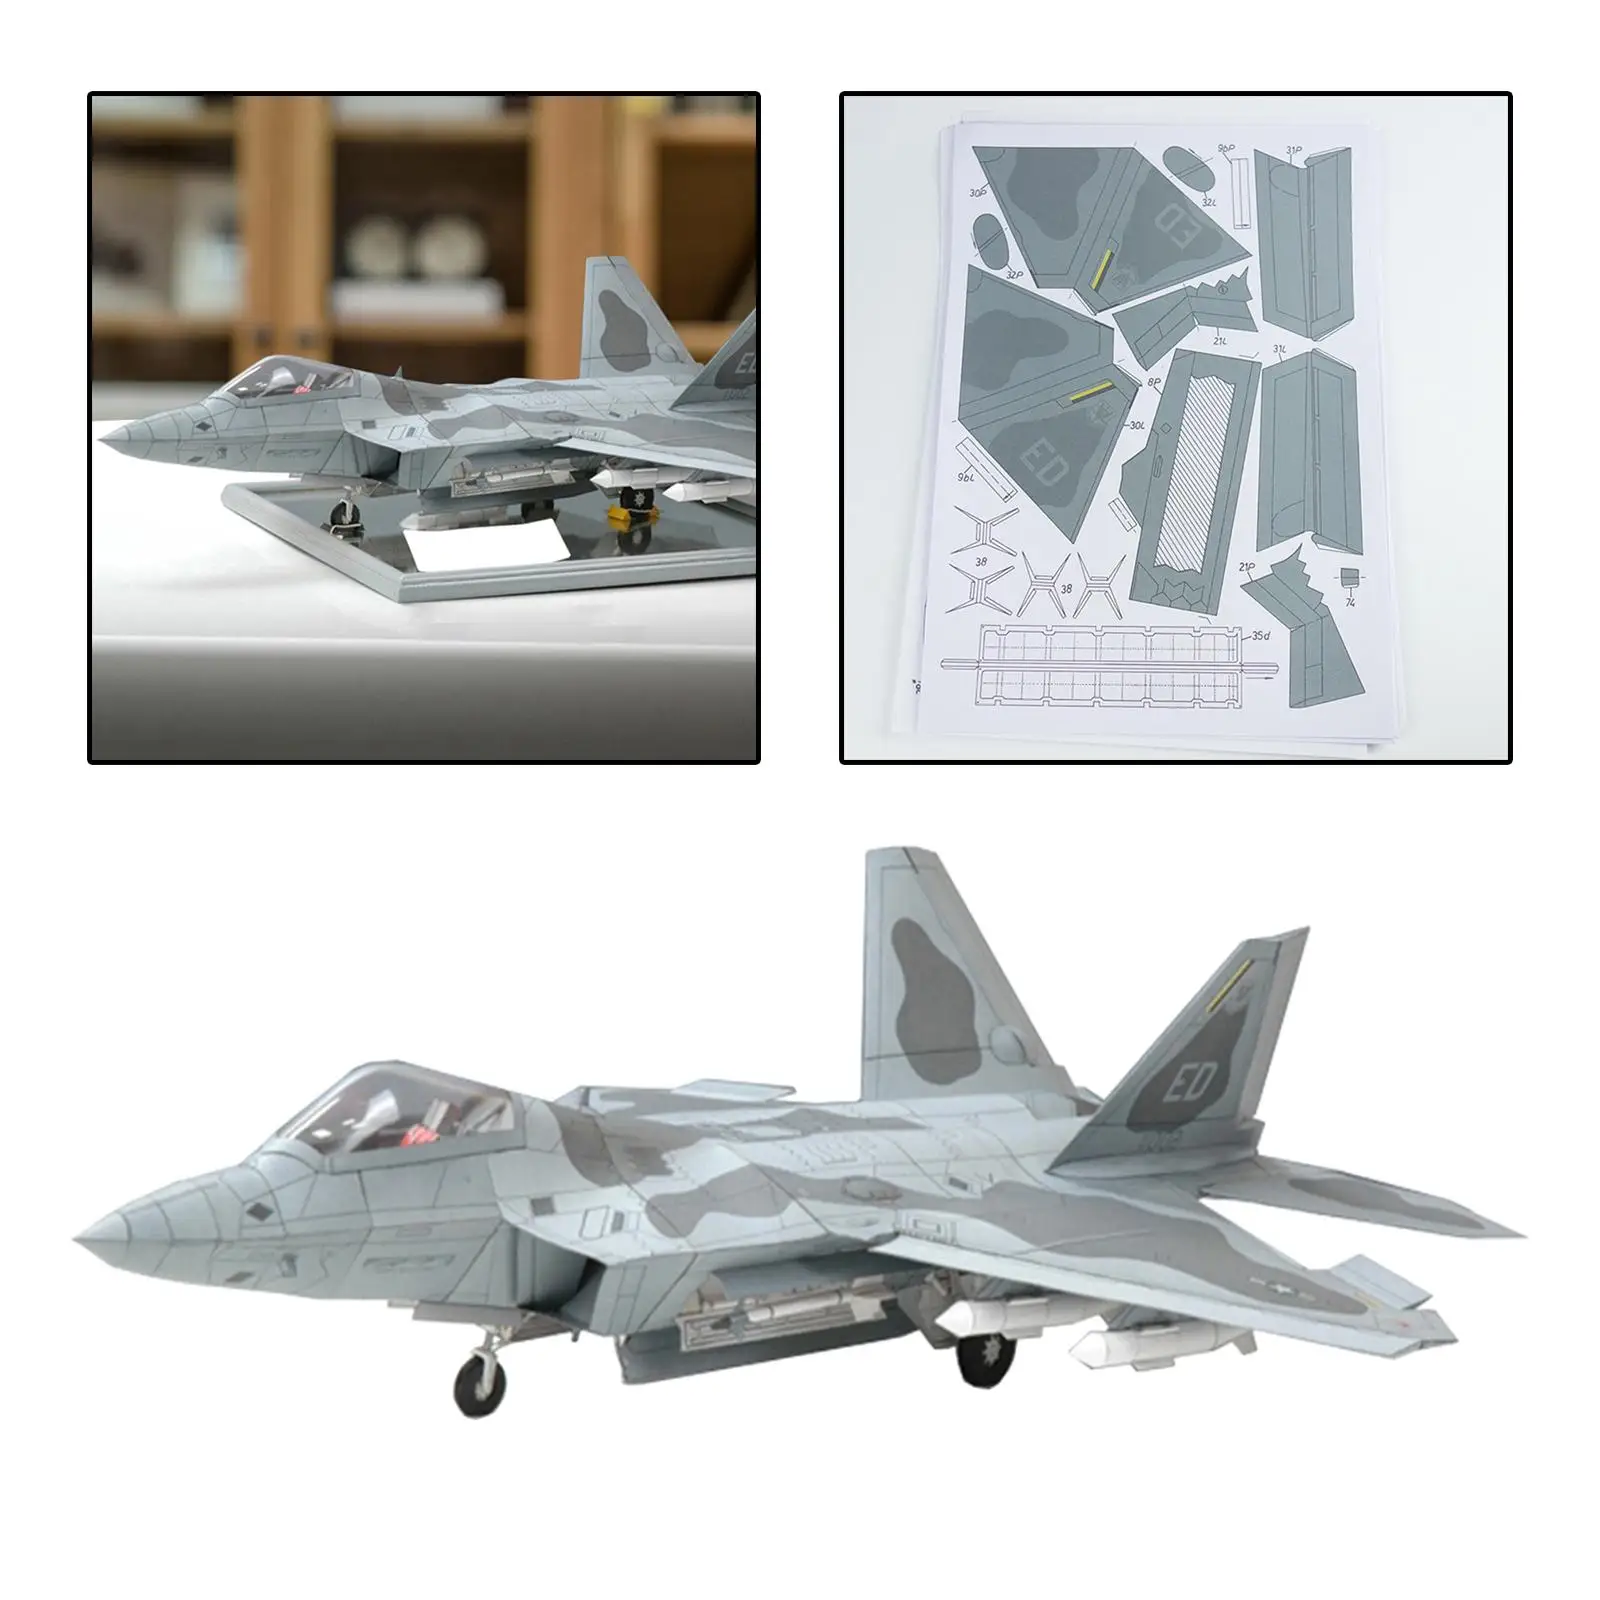 1/33 3D F22 Fighter Assemble Paper Model Kit Papercraft Building DIY Toys Education Toys for Adults Kids Boys Collectables Gifts